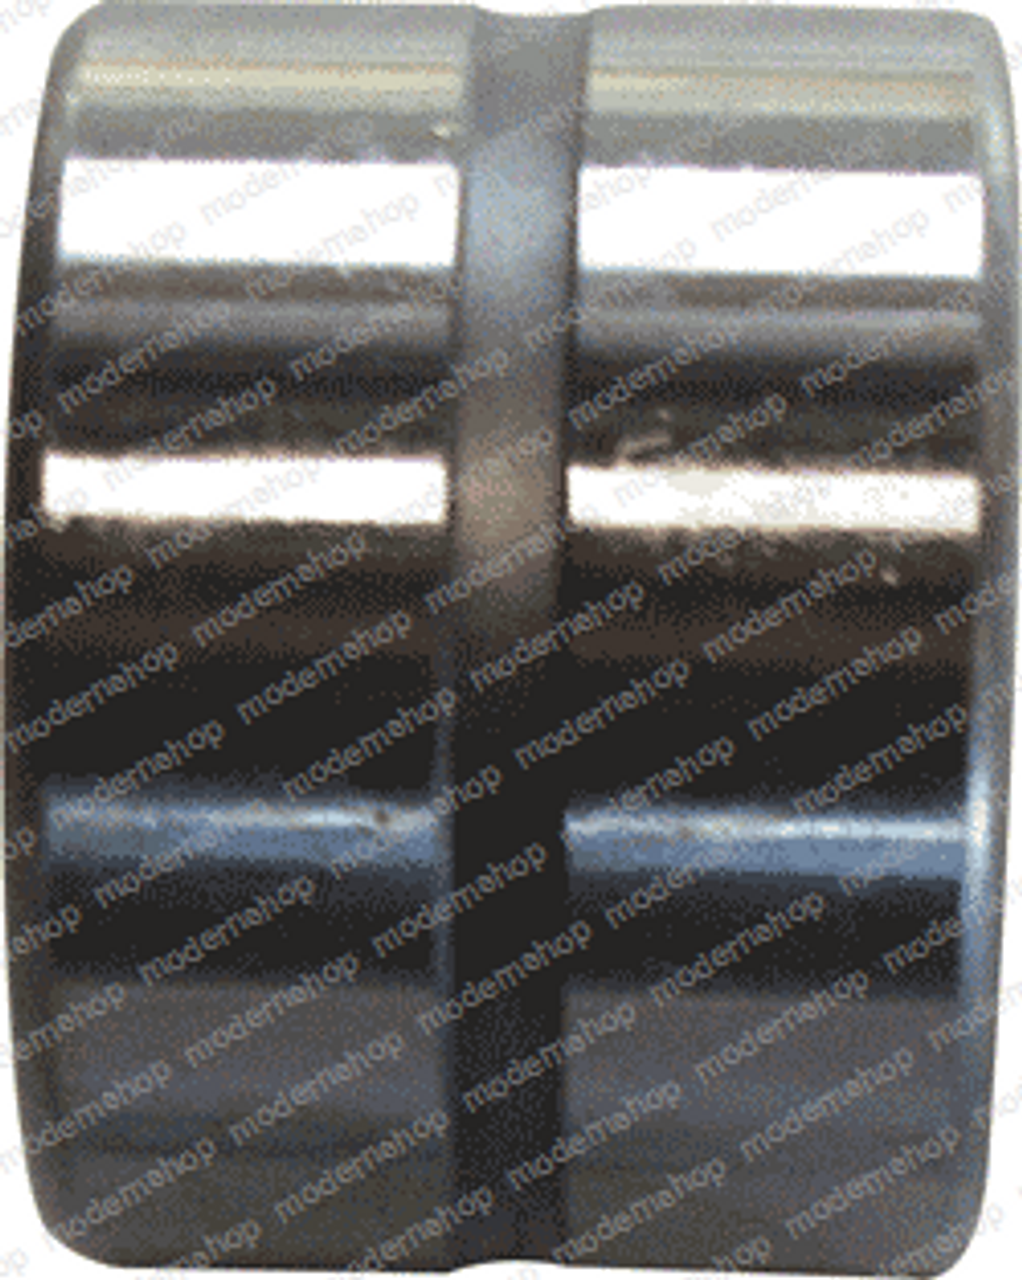 351: General Electric BEARING-ROLLER 875x1375x100